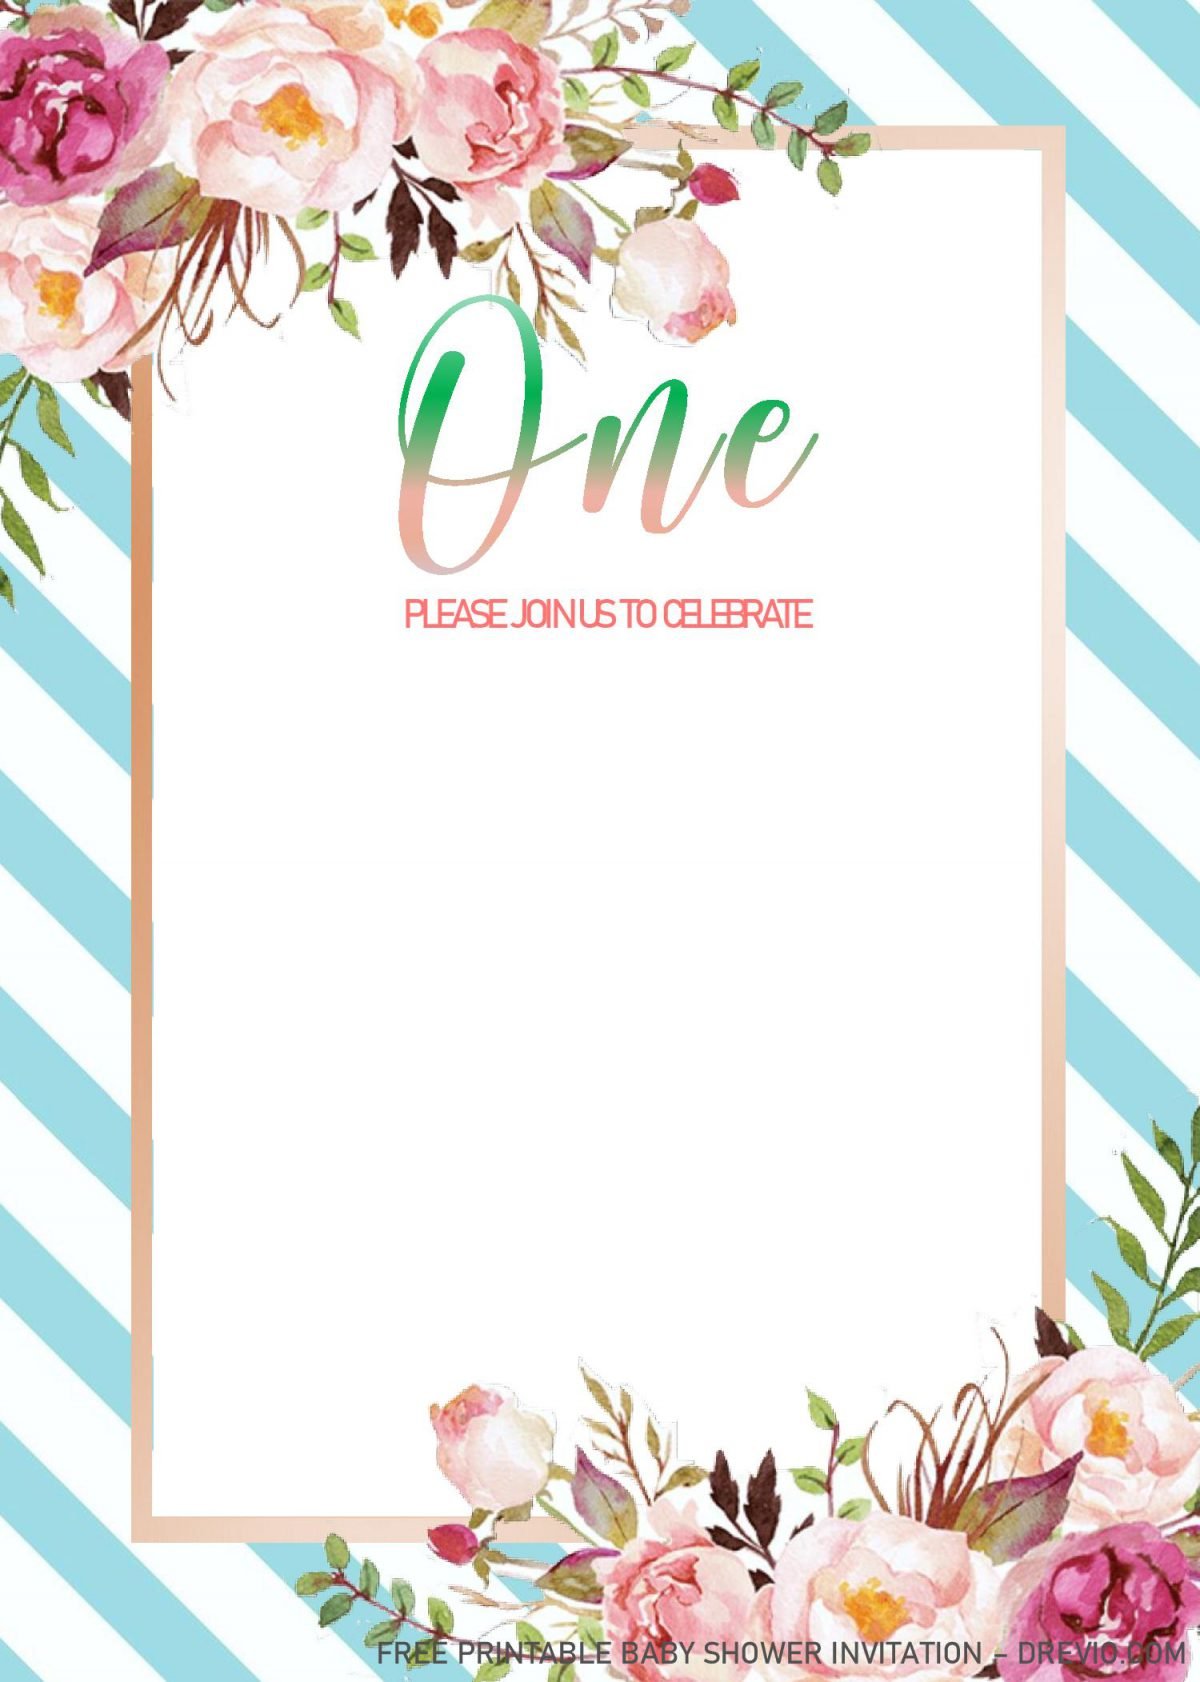 Blush Pink 1st Birthday Invitation Templates - Editable With MS Word and decorated with Watercolor Floral